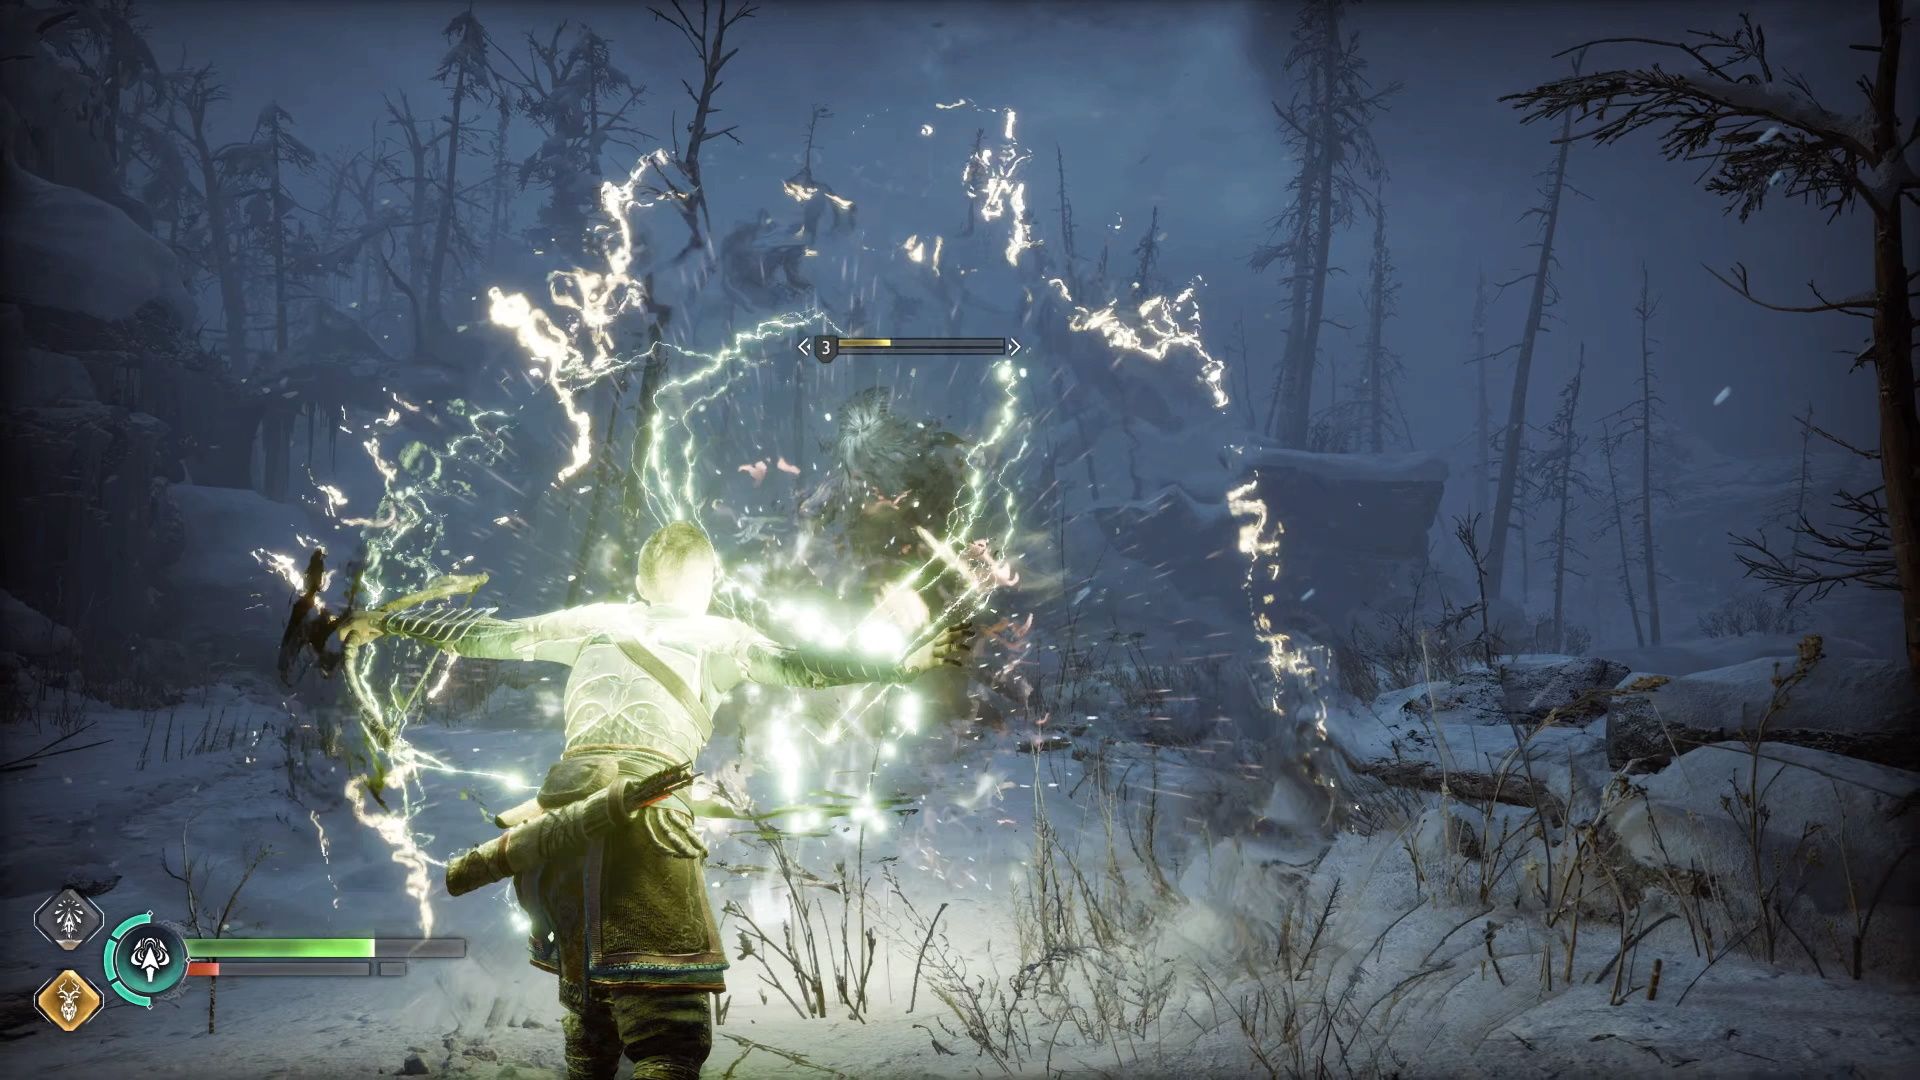 God of War Ragnarok, The Runaway, Parrying The Wight's Projectiles